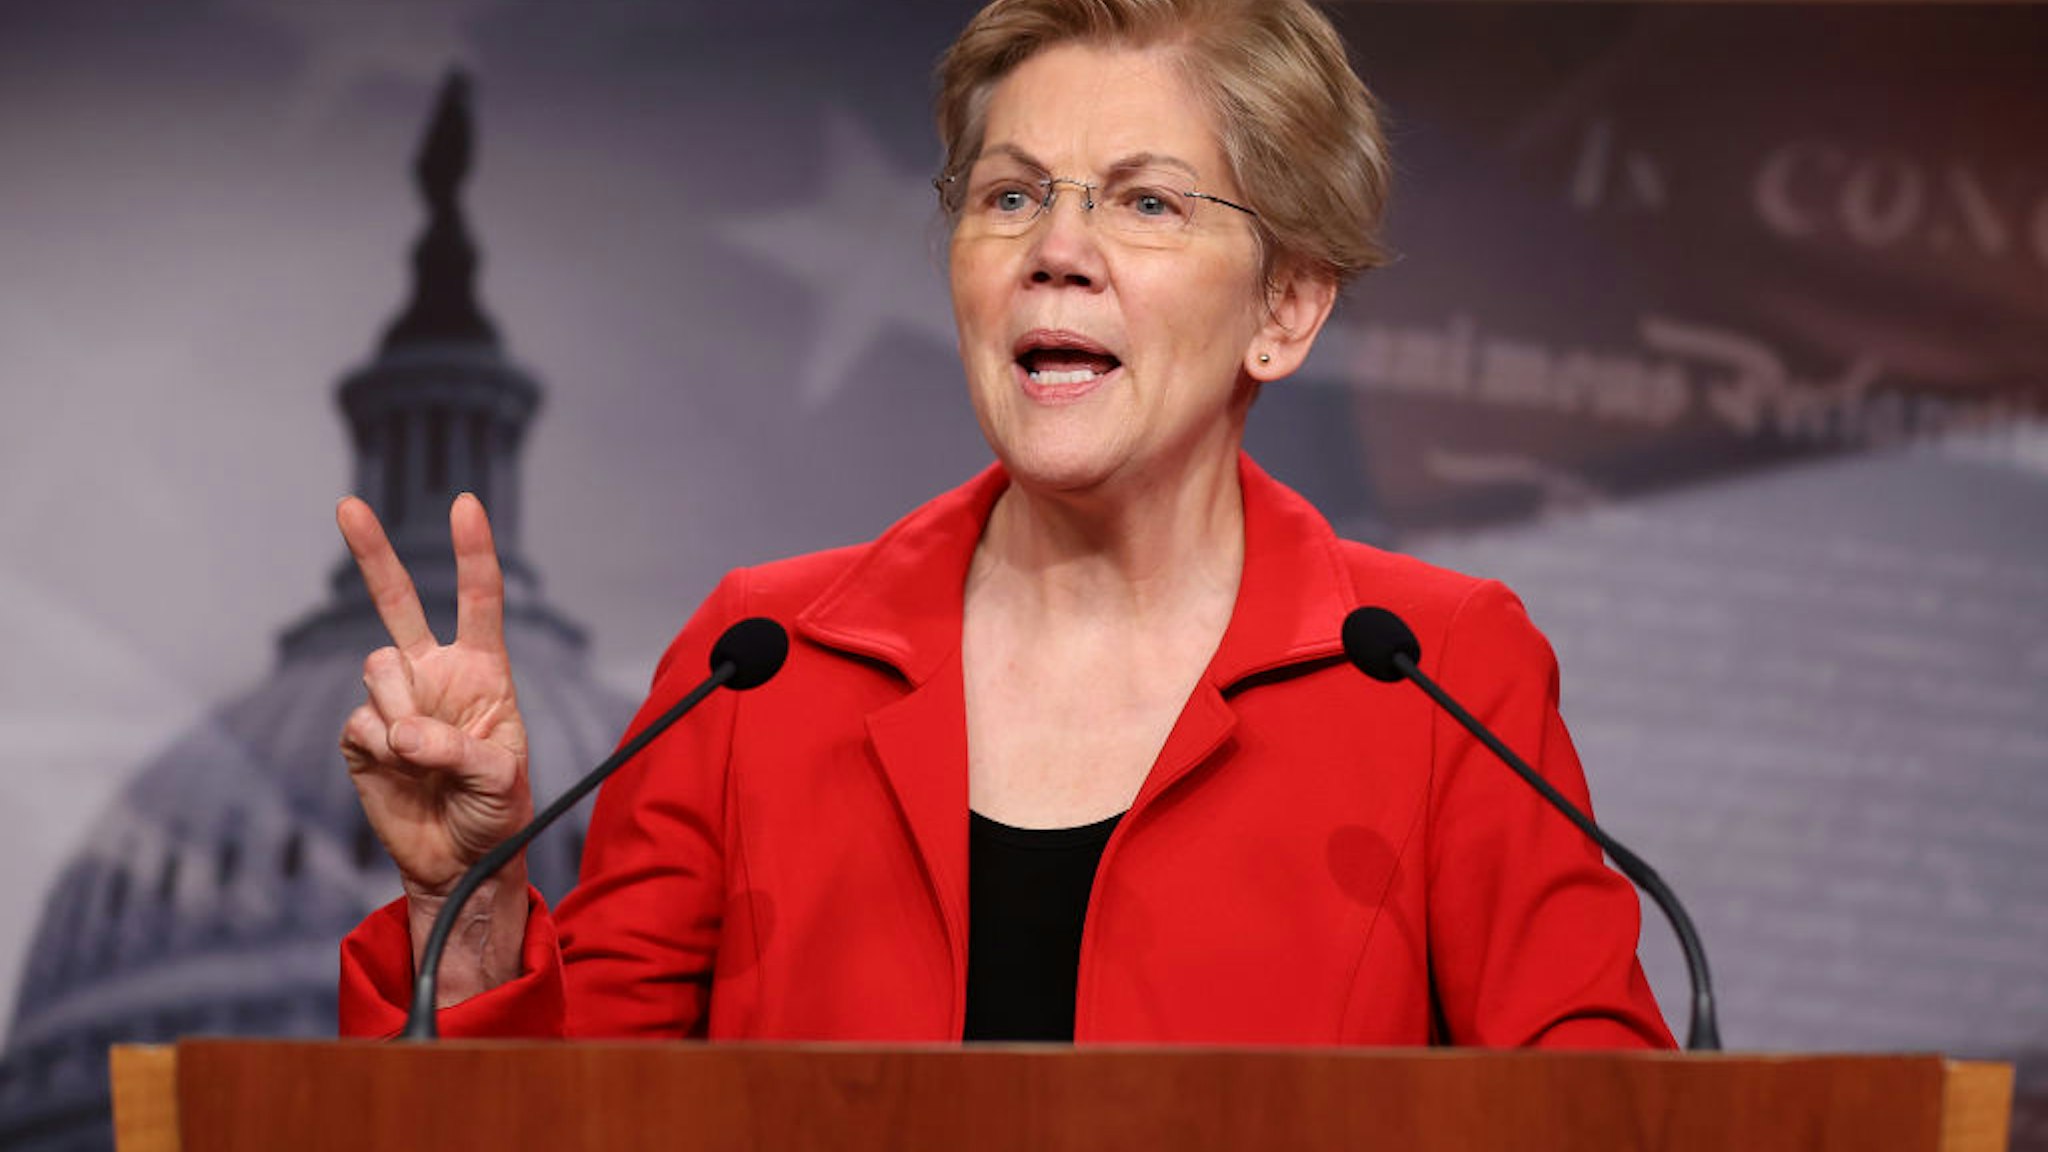 Sen. Elizabeth Warren (D-MA) holds a news conference to announce legislation that would tax the net worth of America's wealthiest individuals at the U.S. Capitol on March 01, 2021 in Washington, DC.